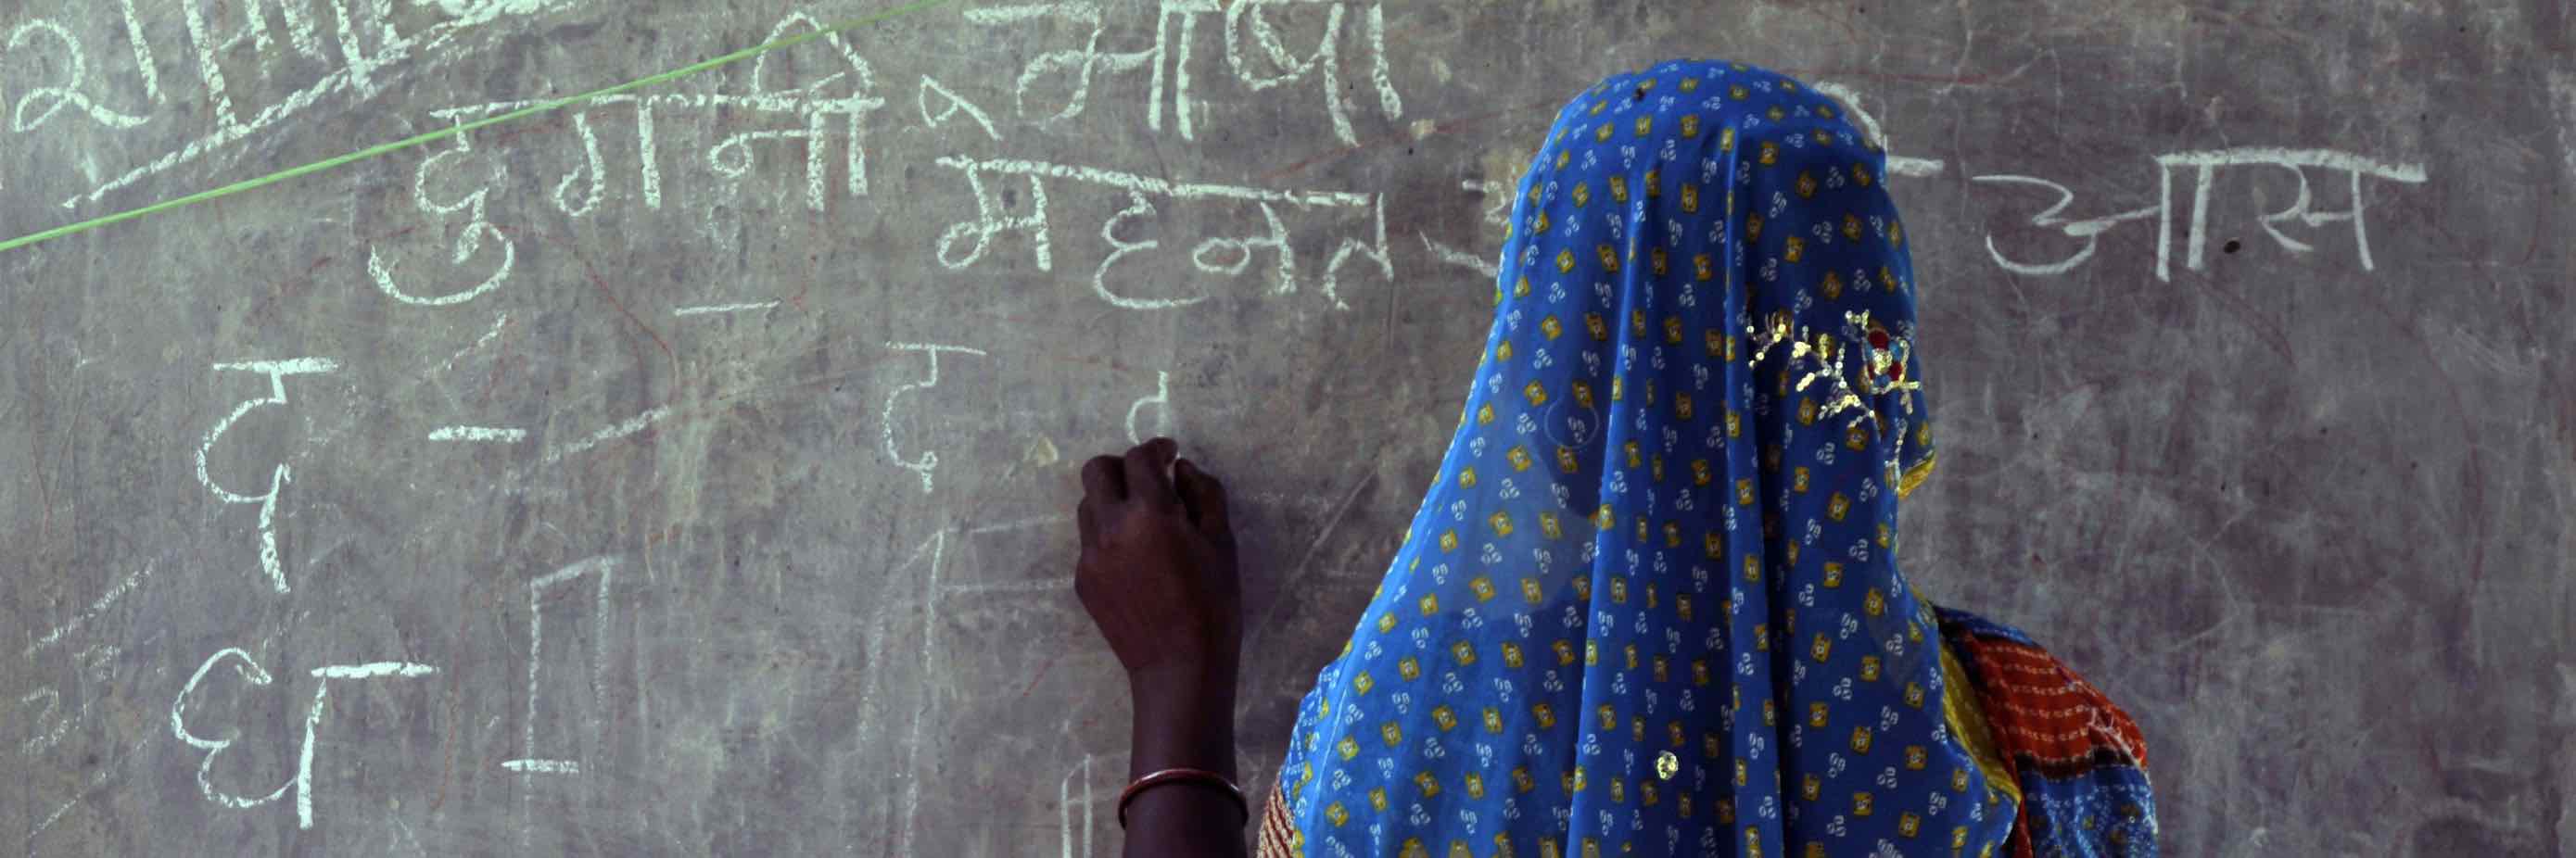 a young student at a classroom blackboard